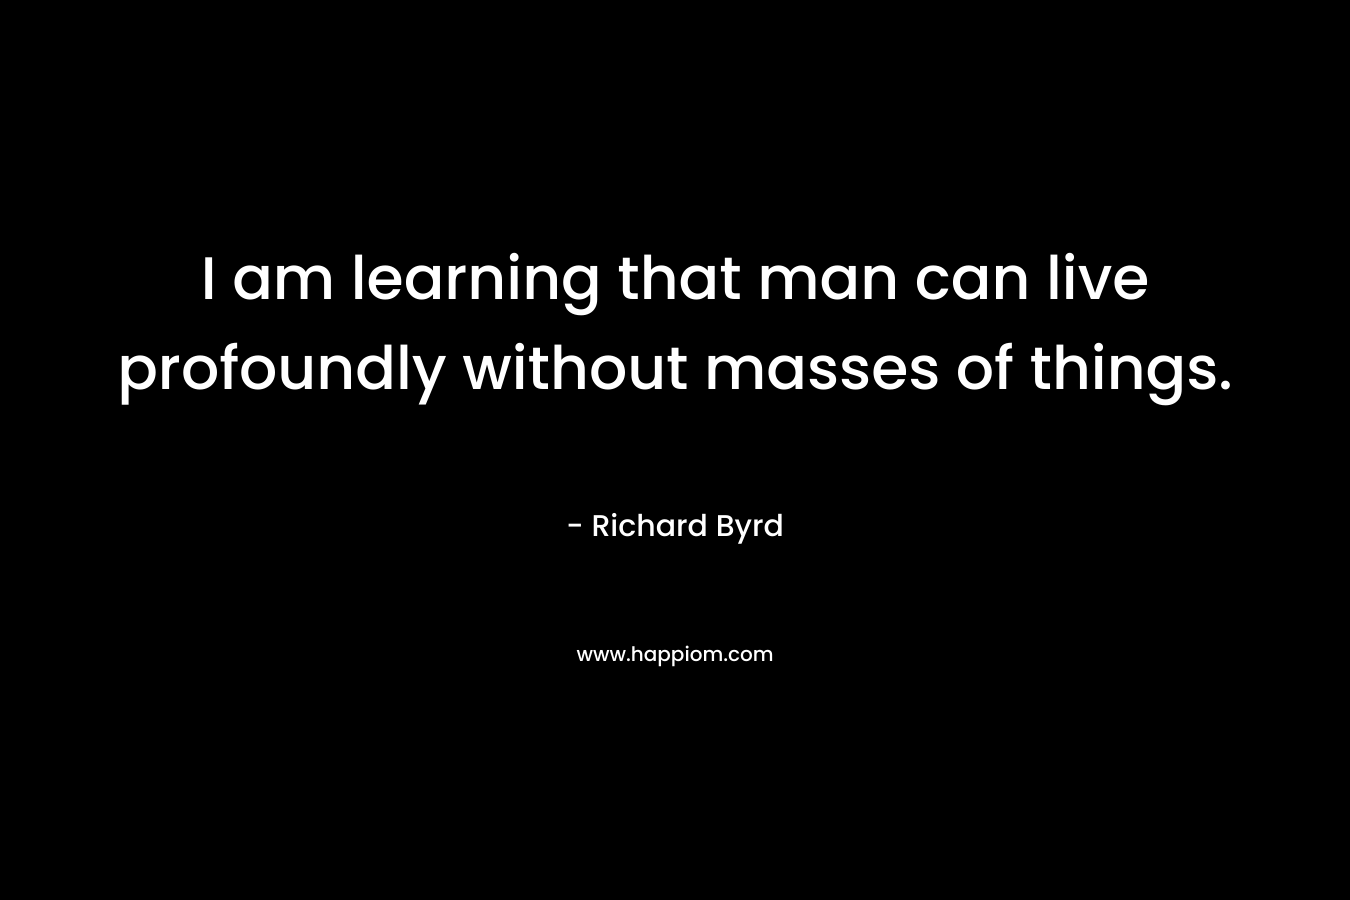 I am learning that man can live profoundly without masses of things. – Richard Byrd